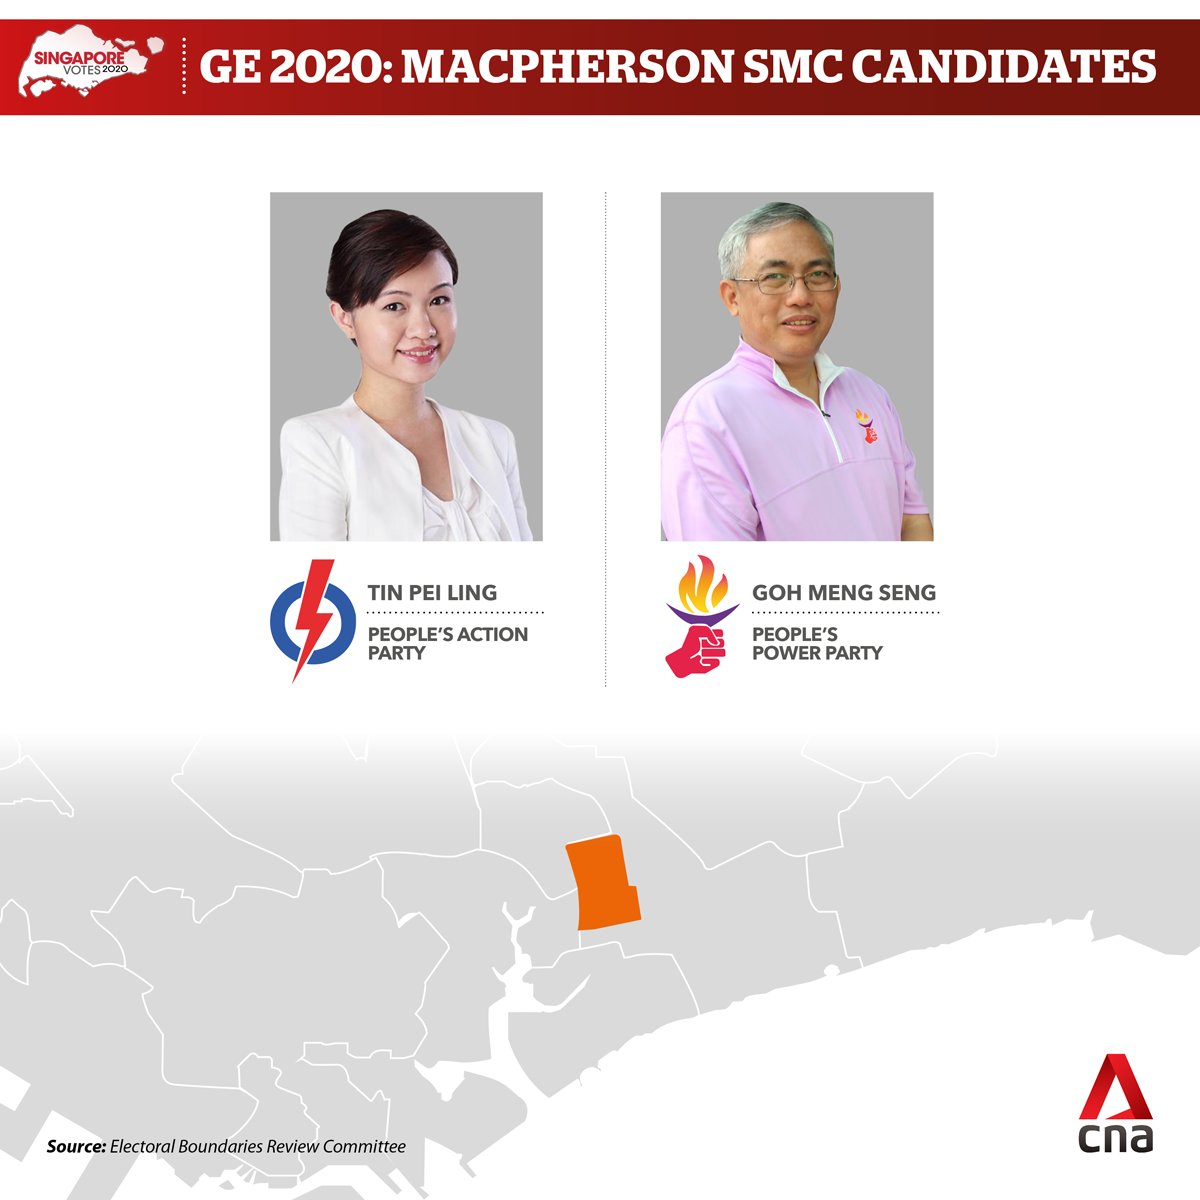  #GE2020  : PAP's Tin Pei Ling will take on PPP's Goh Meng Seng as she defends her seat in MacPherson  https://cna.asia/2AdxZkC 